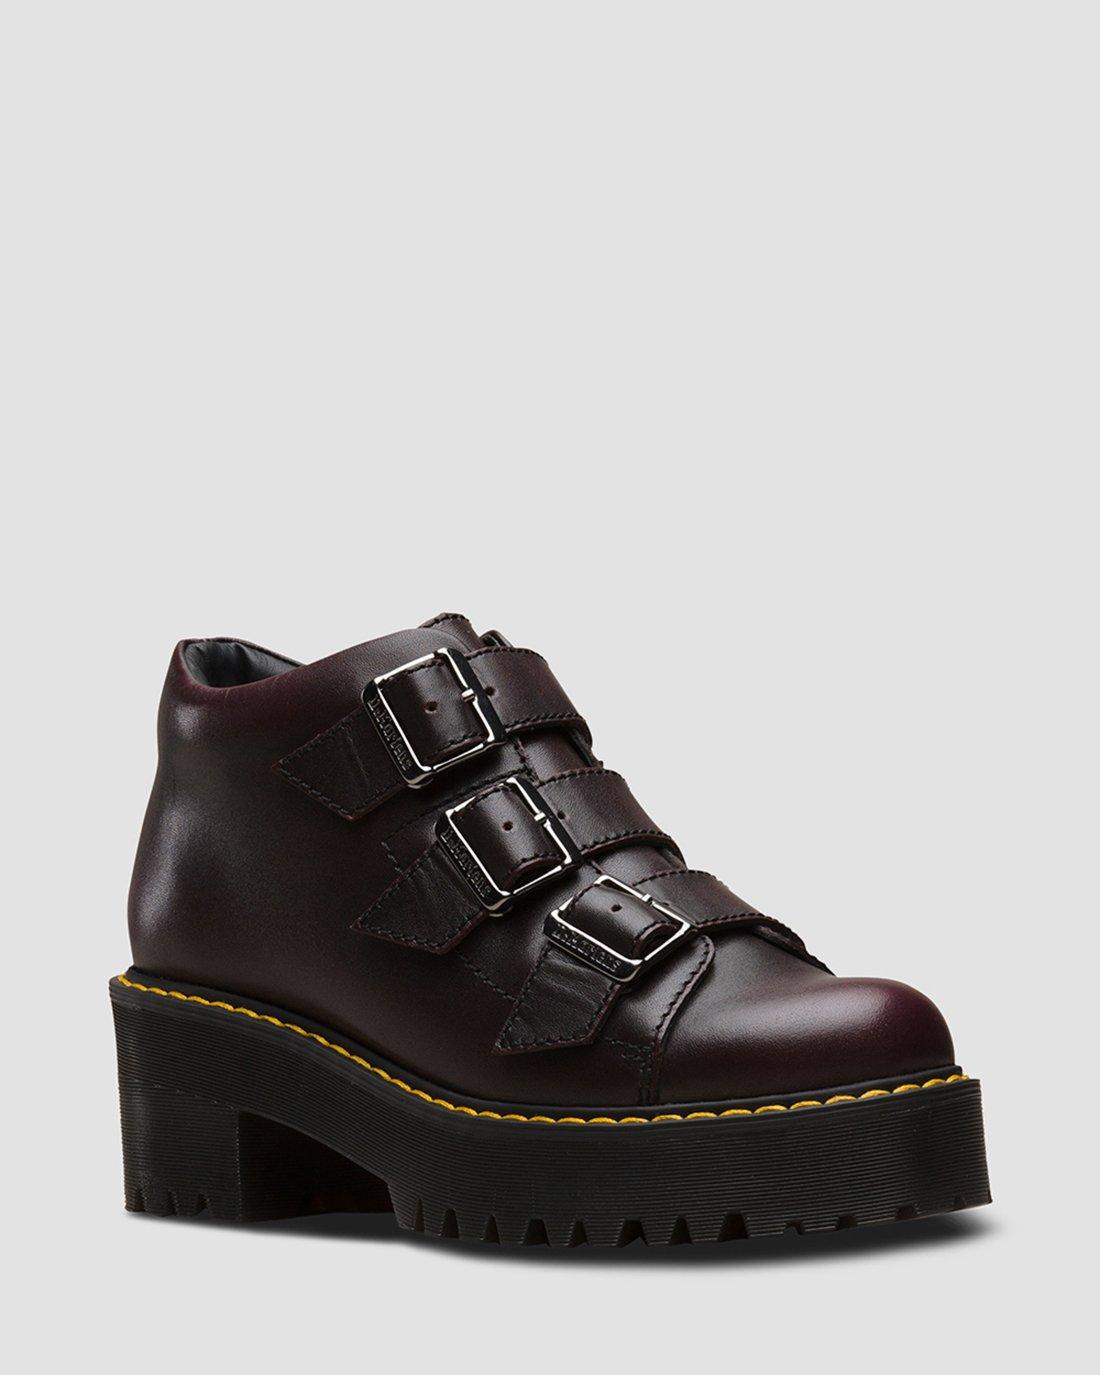 black and red dr martens